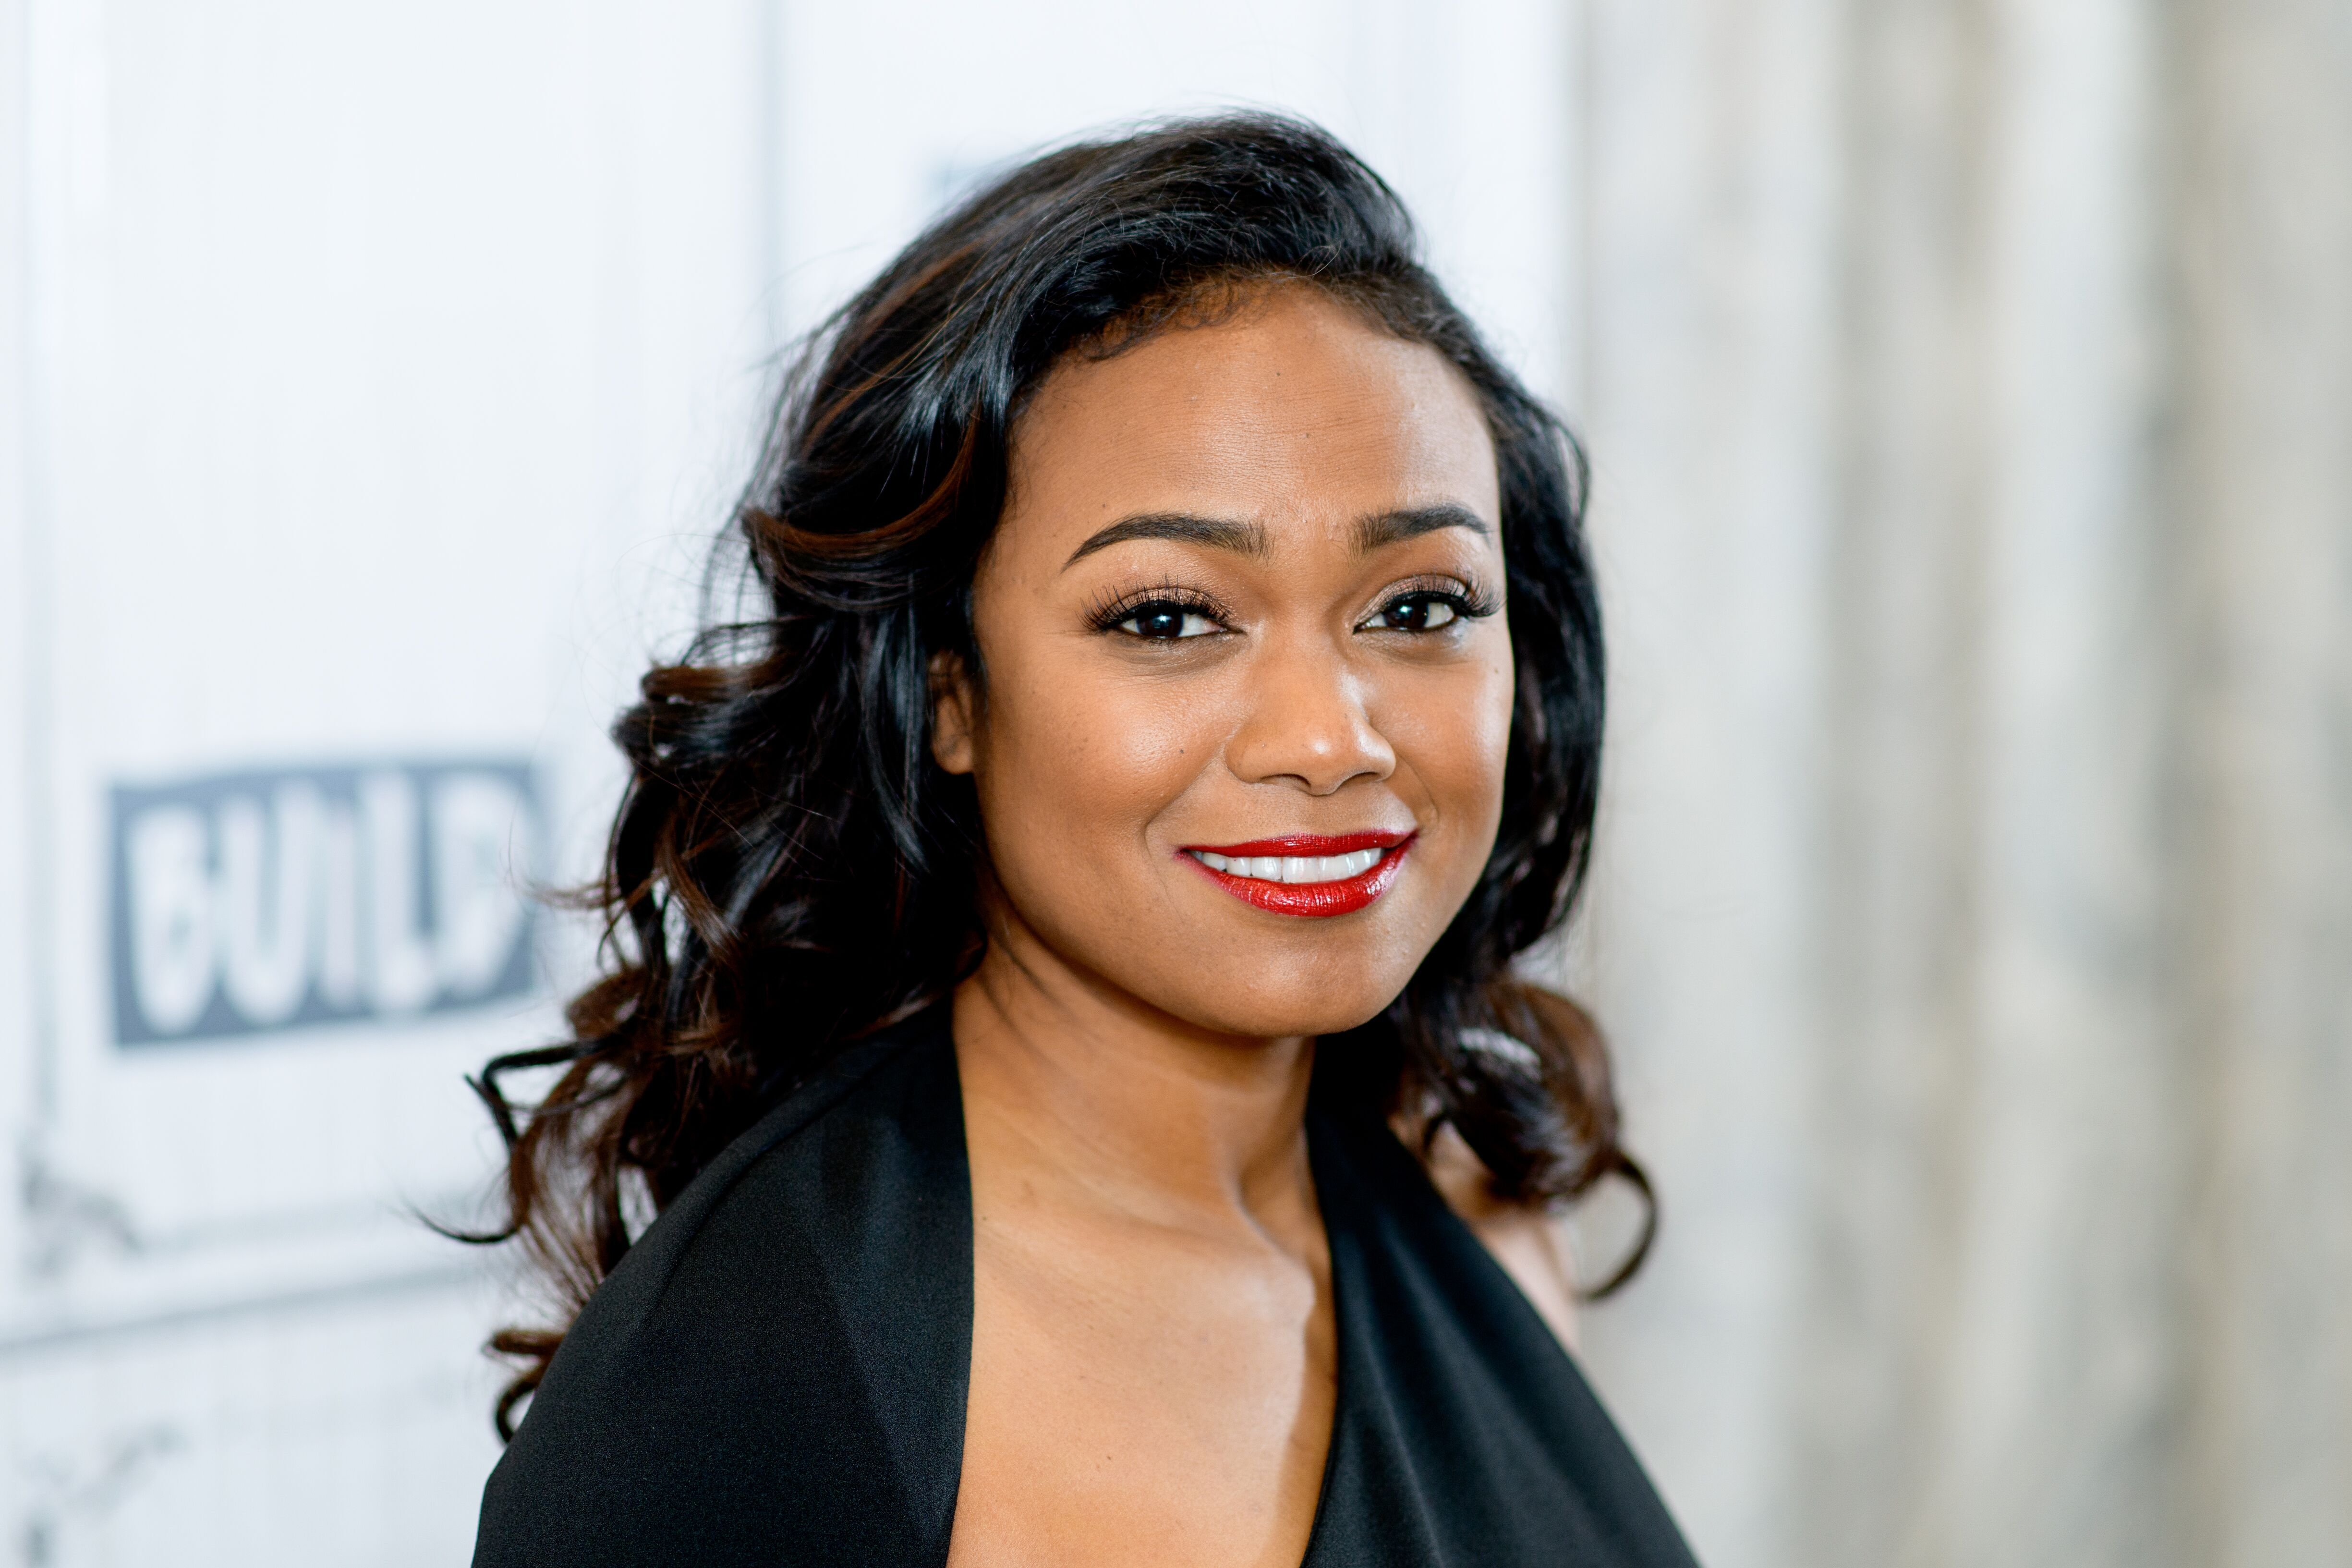 Tatyana Ali discusses American Heart Association's "Go Red" campaign with the Build Series at Build Studio on February 8, 2018 | Photo: Getty Images